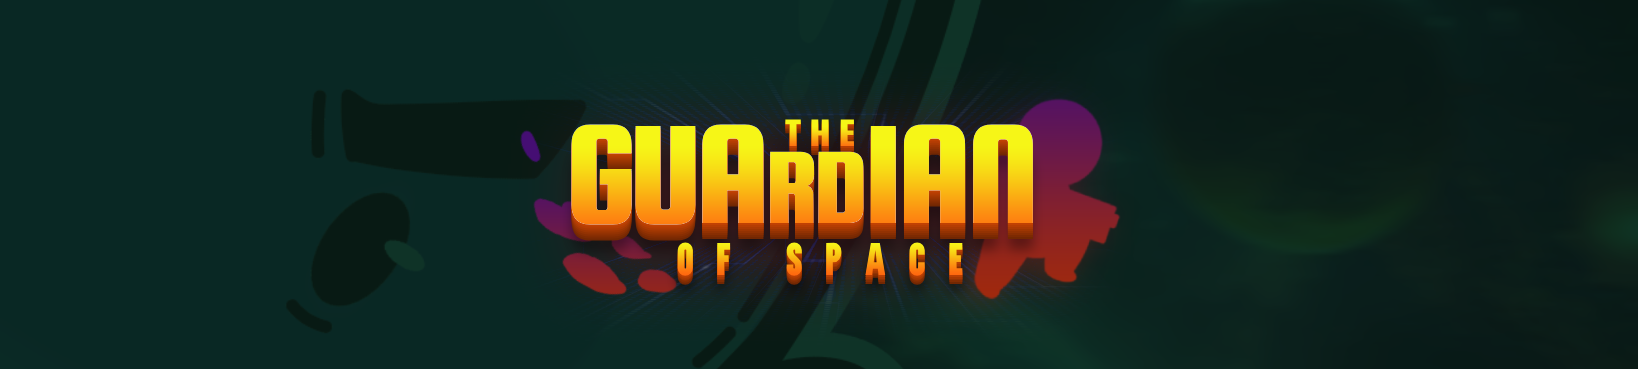 The guardian of space (Demo)